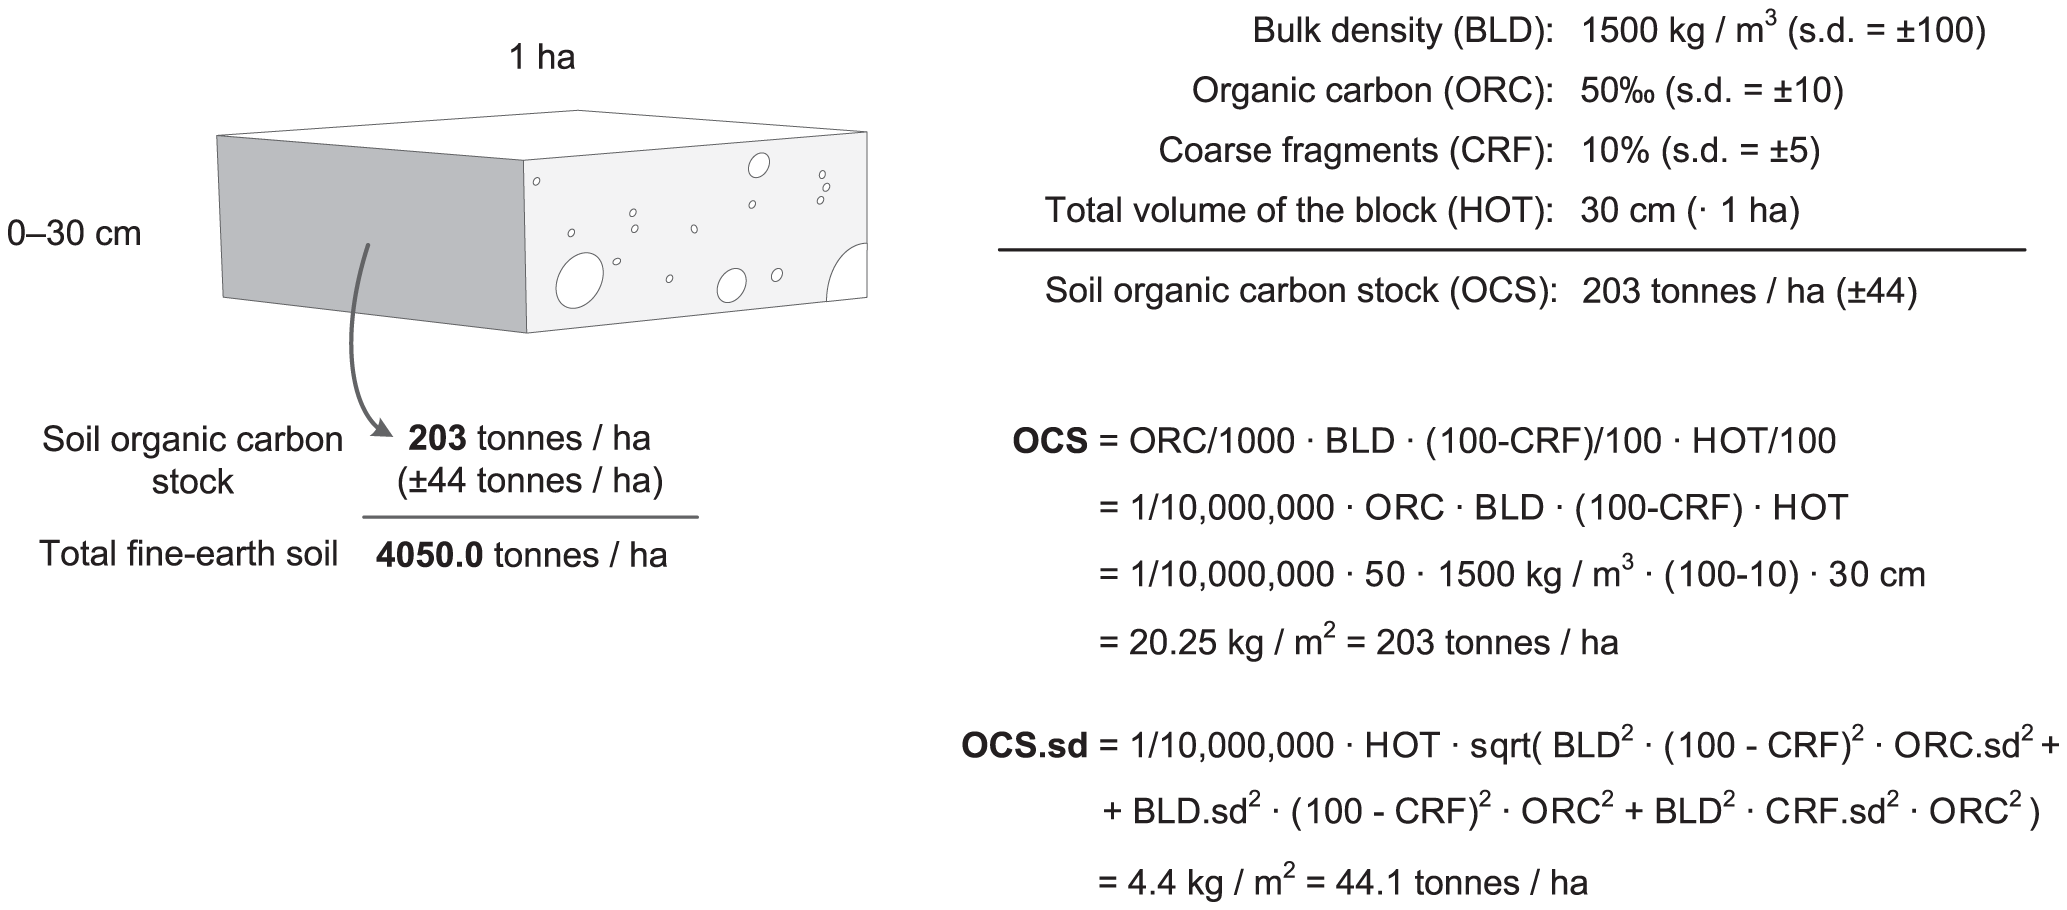 Example of how total soil organic carbon stock (OCS) and its propagated error can be estimated for a given volume of soil using organic carbon content (ORC), bulk density (BLD), thickness of horizon (HOT), and percentage of coarse fragments (CRF). Source: https://doi.org/10.1371/journal.pone.0105992.g006